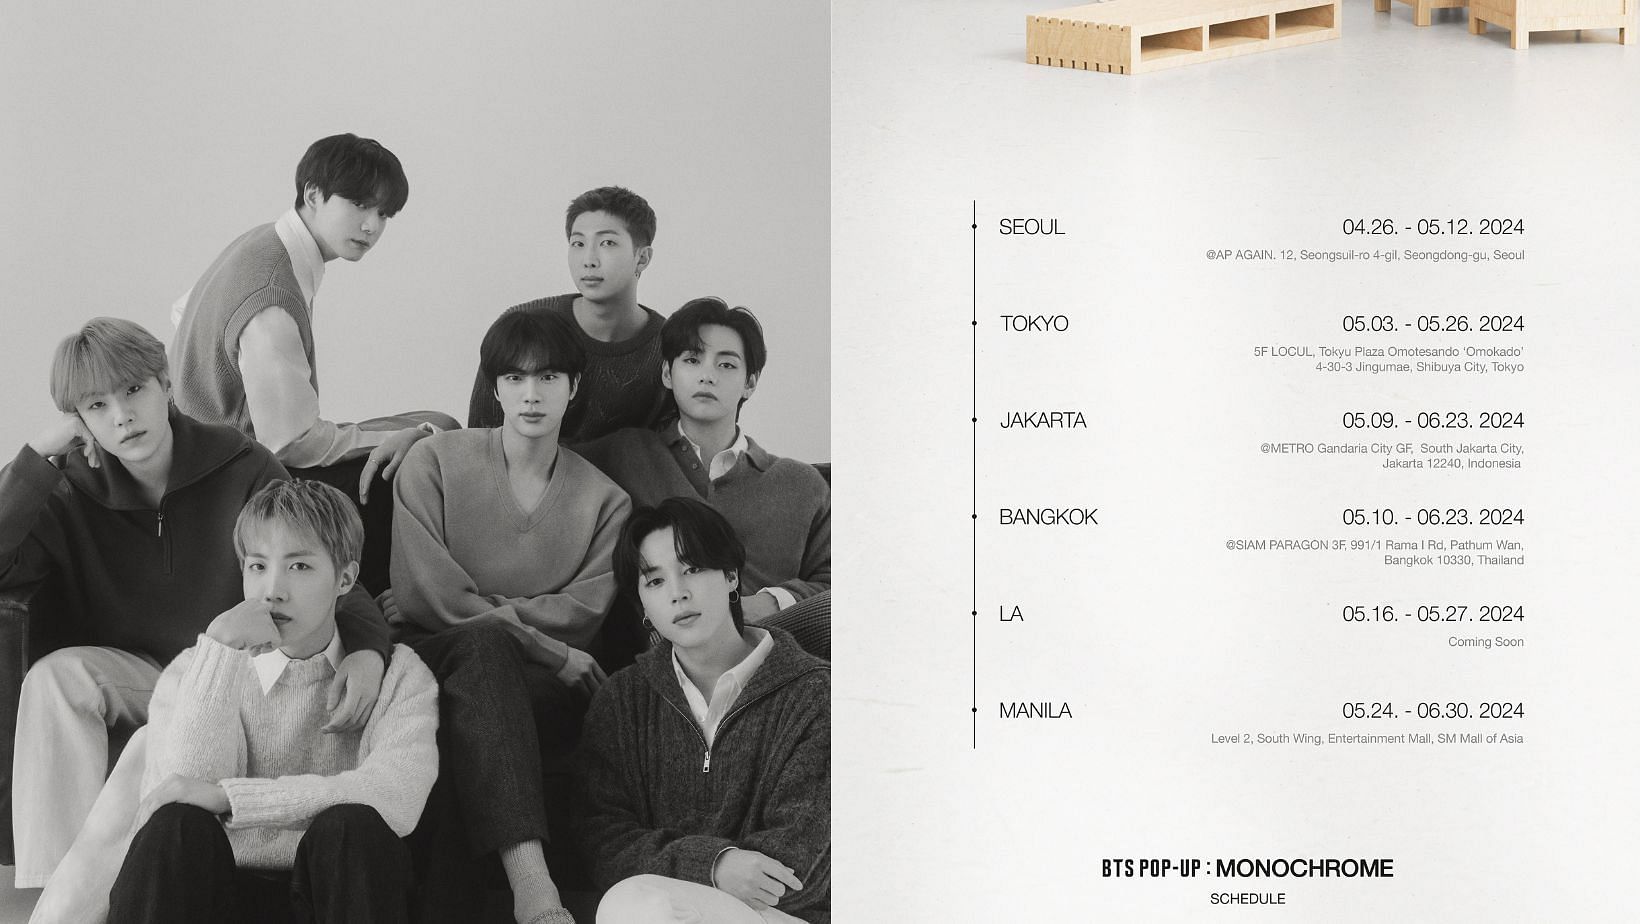 HYBE releases much-anticipated BTS POP-UP MONOCHROME global schedule and official trailer. (Images via X/@bts_bighit)